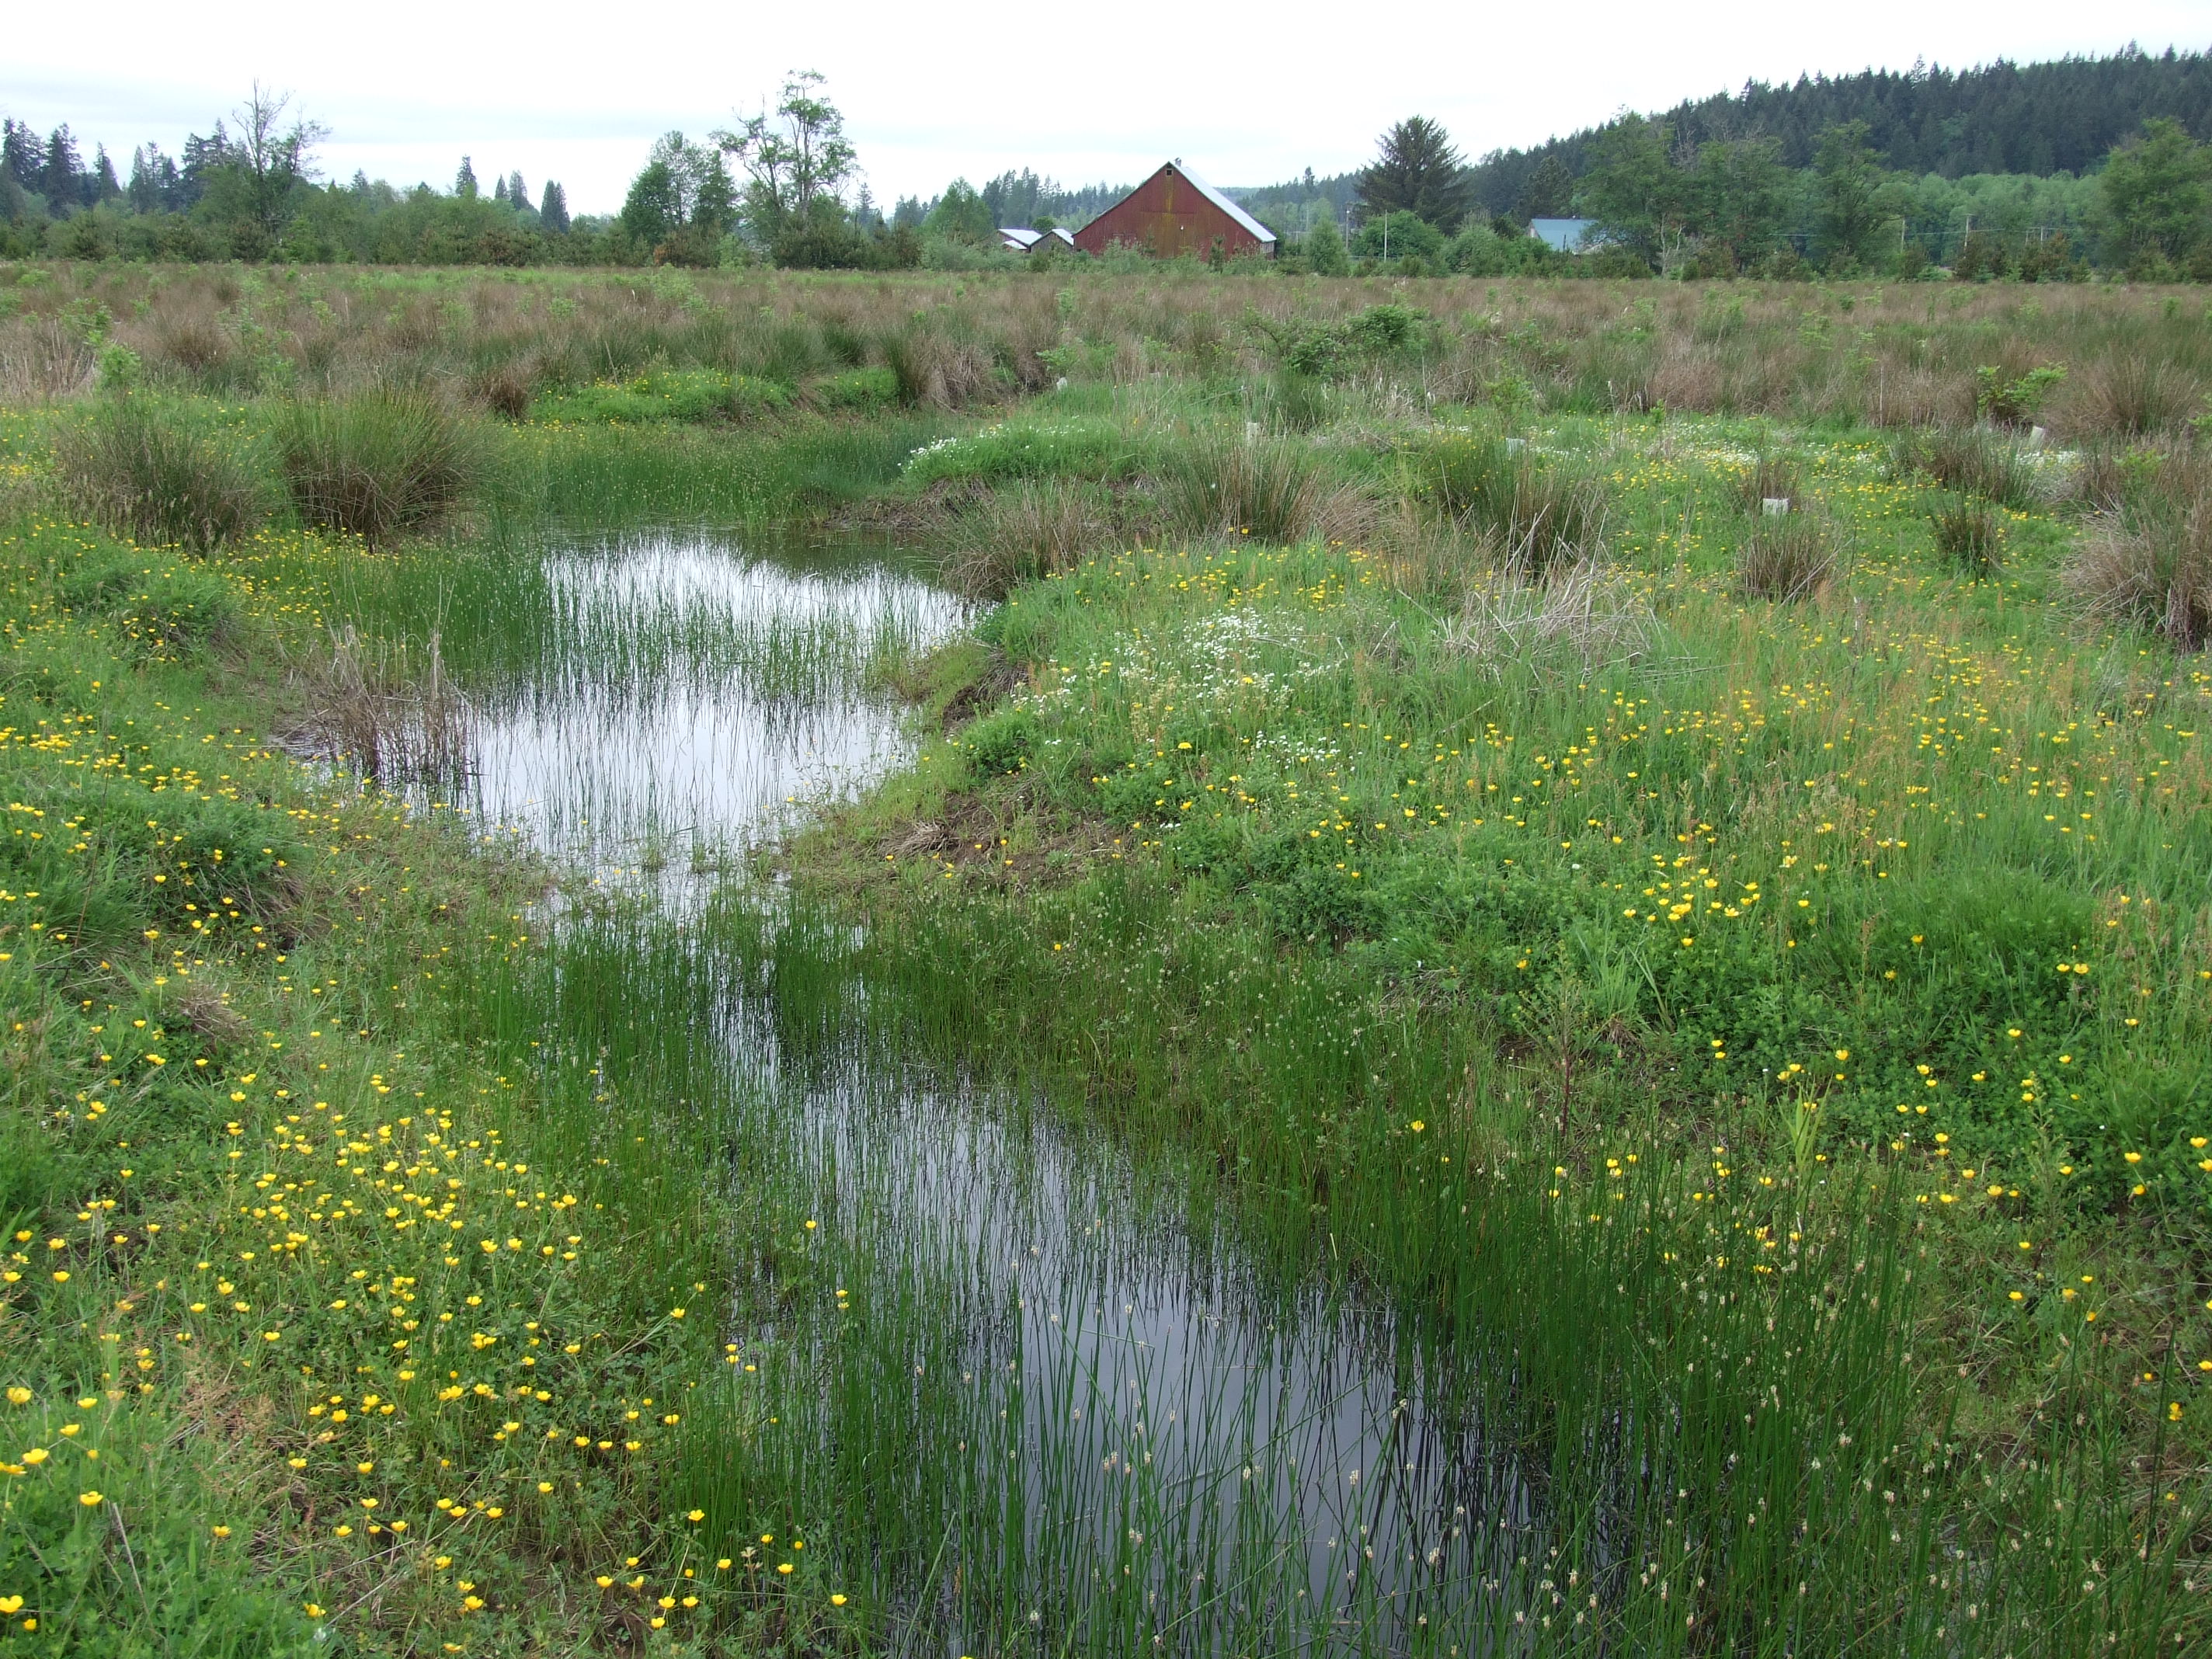 North Fork Newaukum Bank in 2008, showing standing water and flowering, grass-like vegetation.